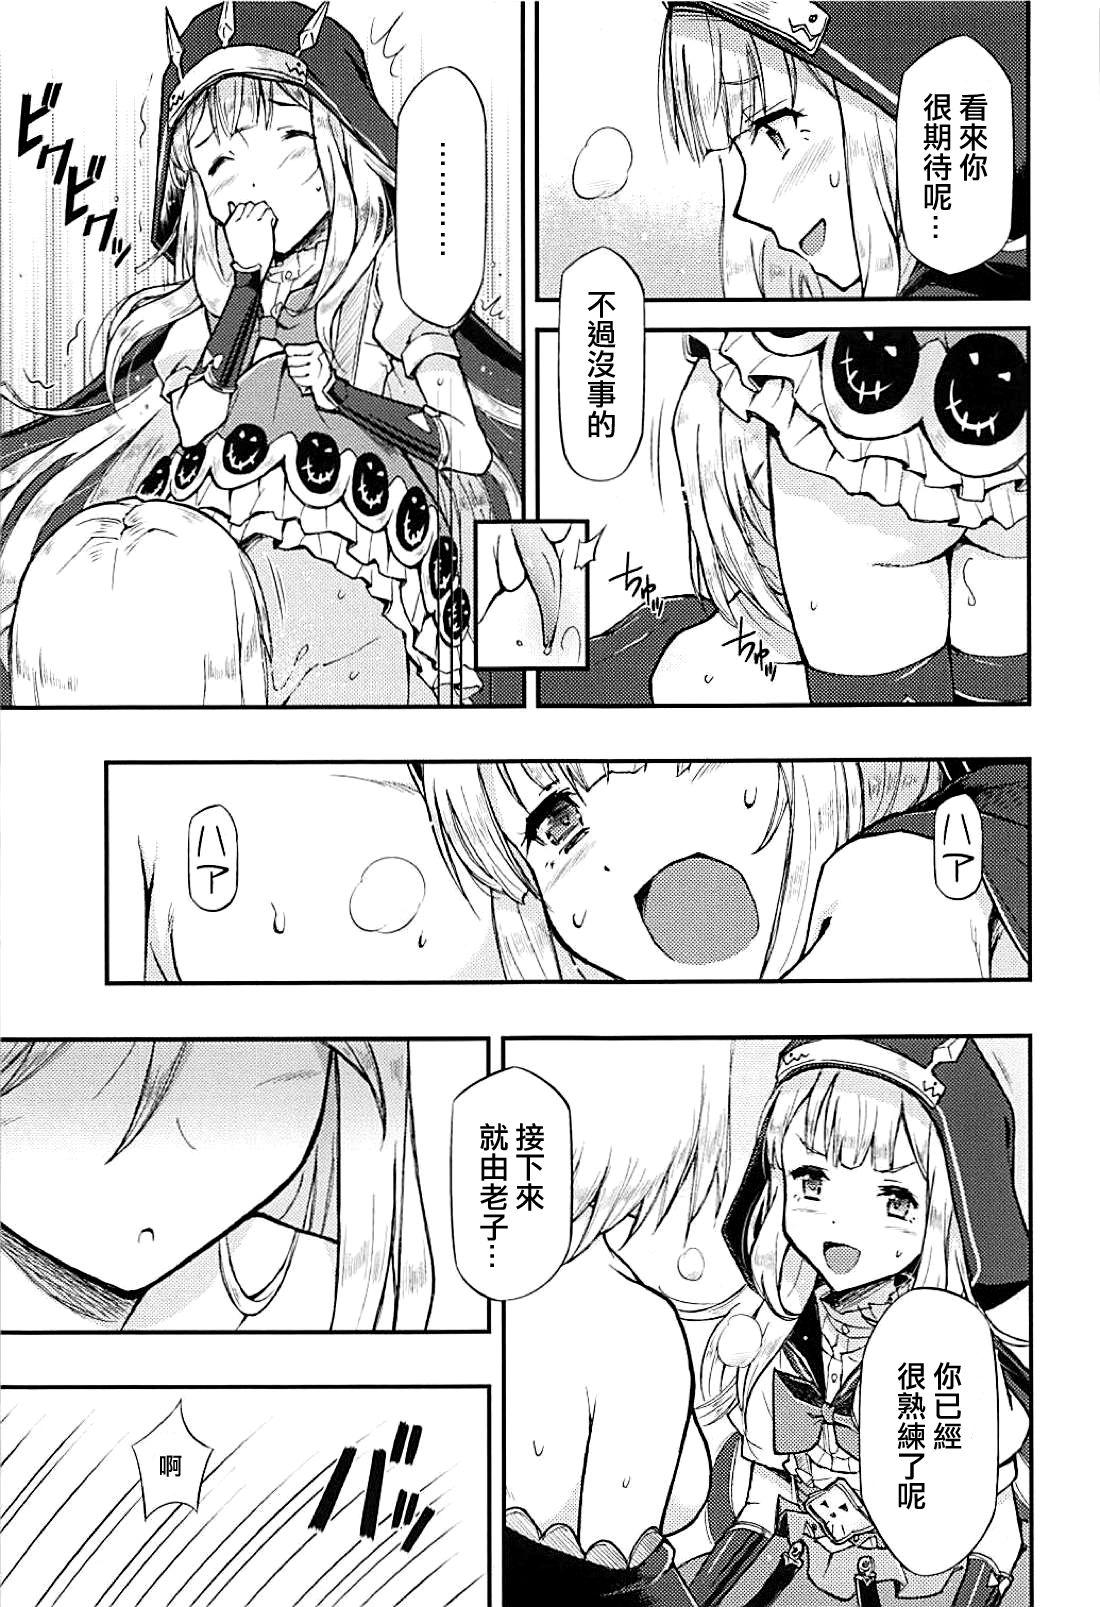 Lady TRICK and TREAT - Granblue fantasy Exhib - Page 12